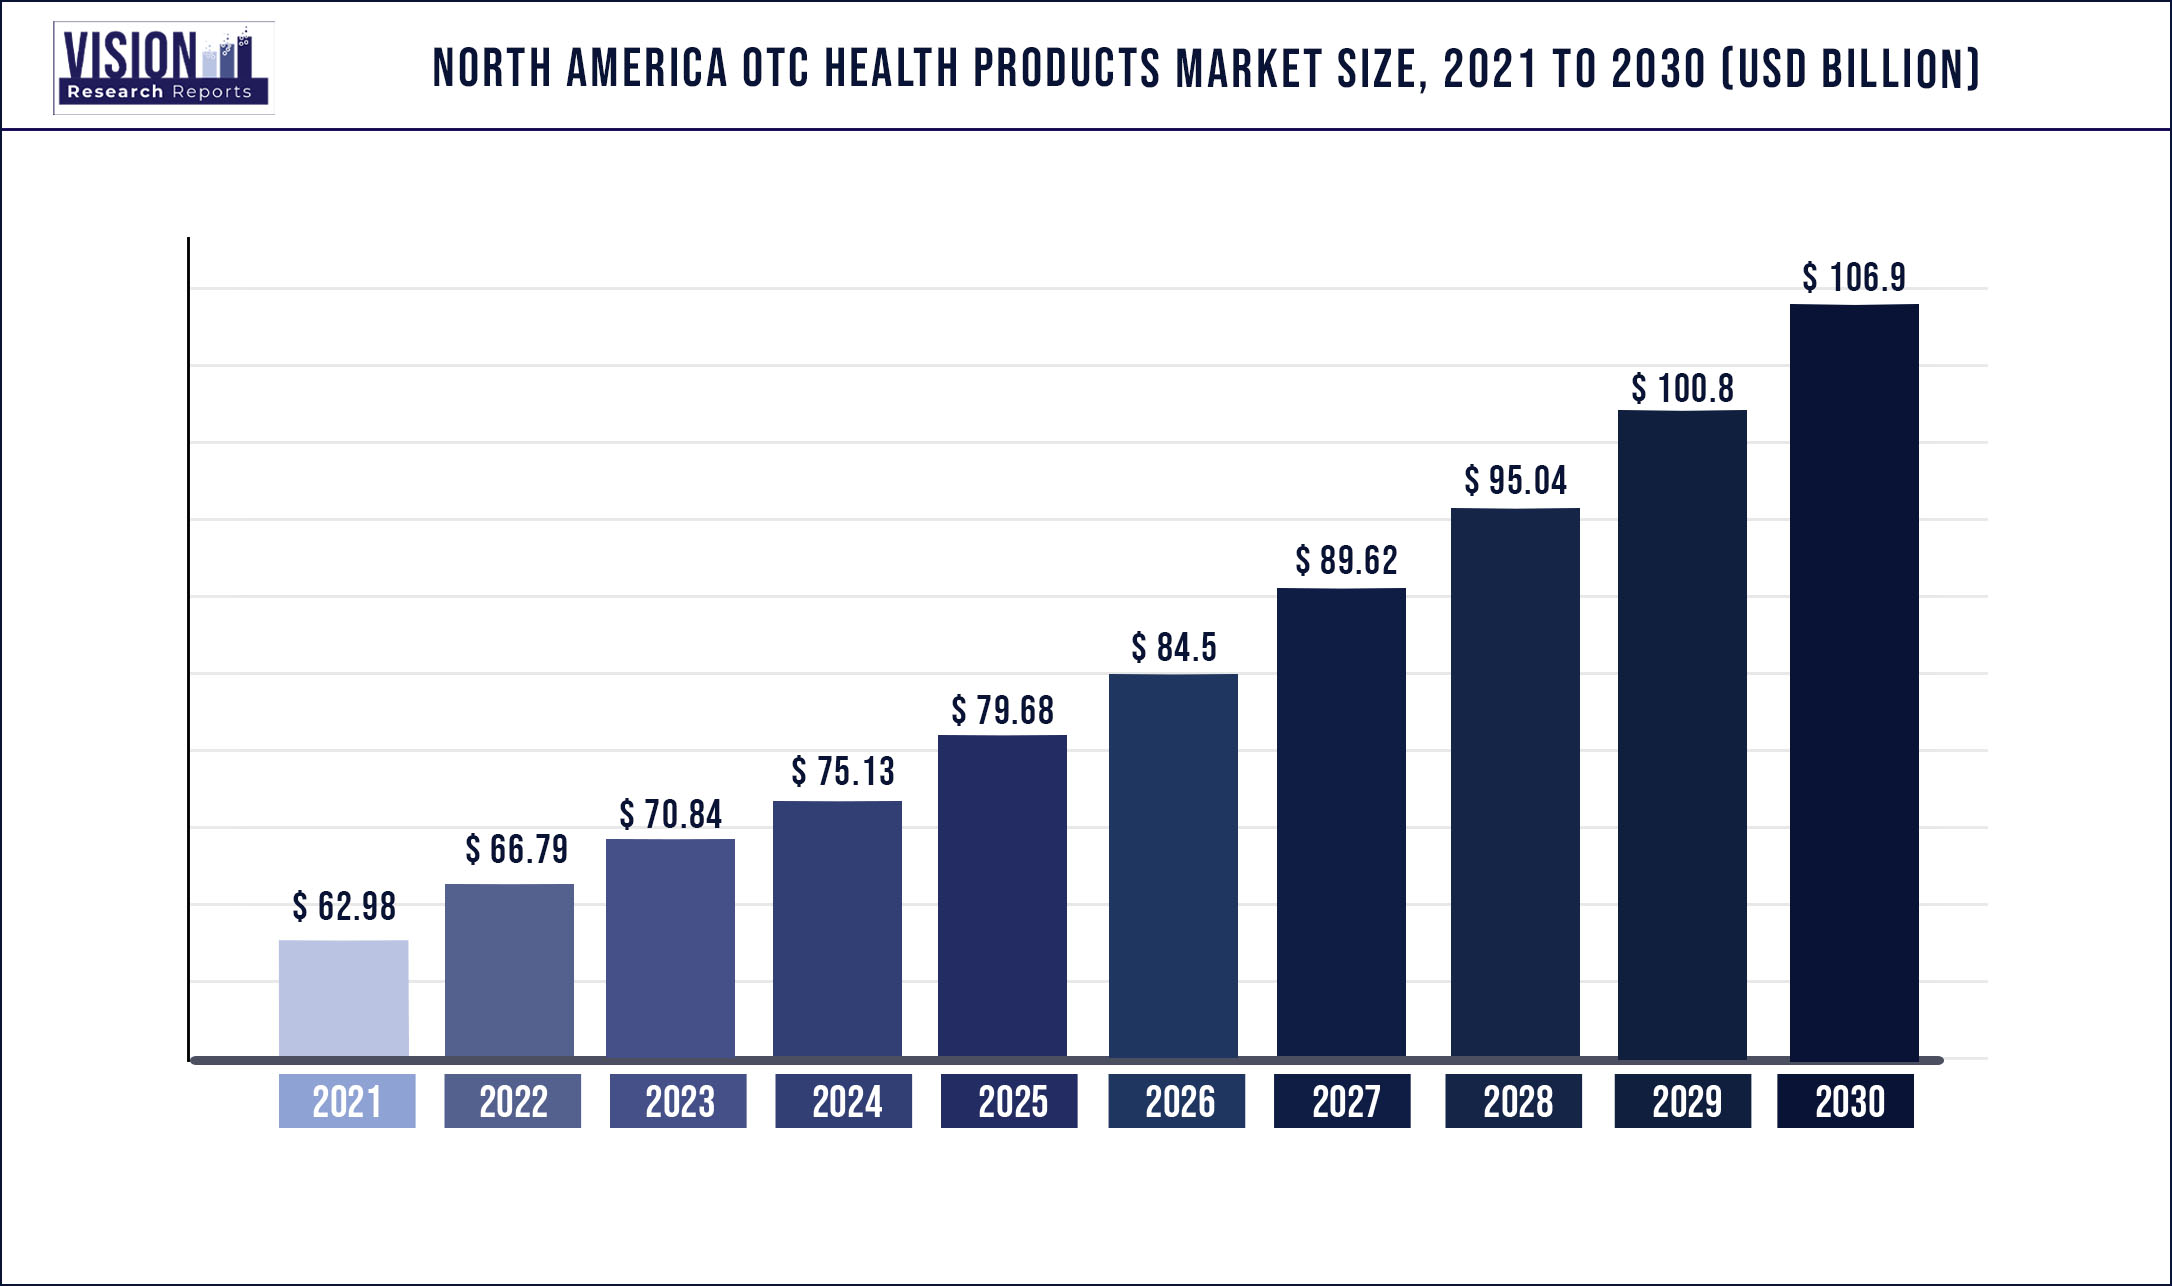 North America OTC Health Products Market Size 2021 to 2030